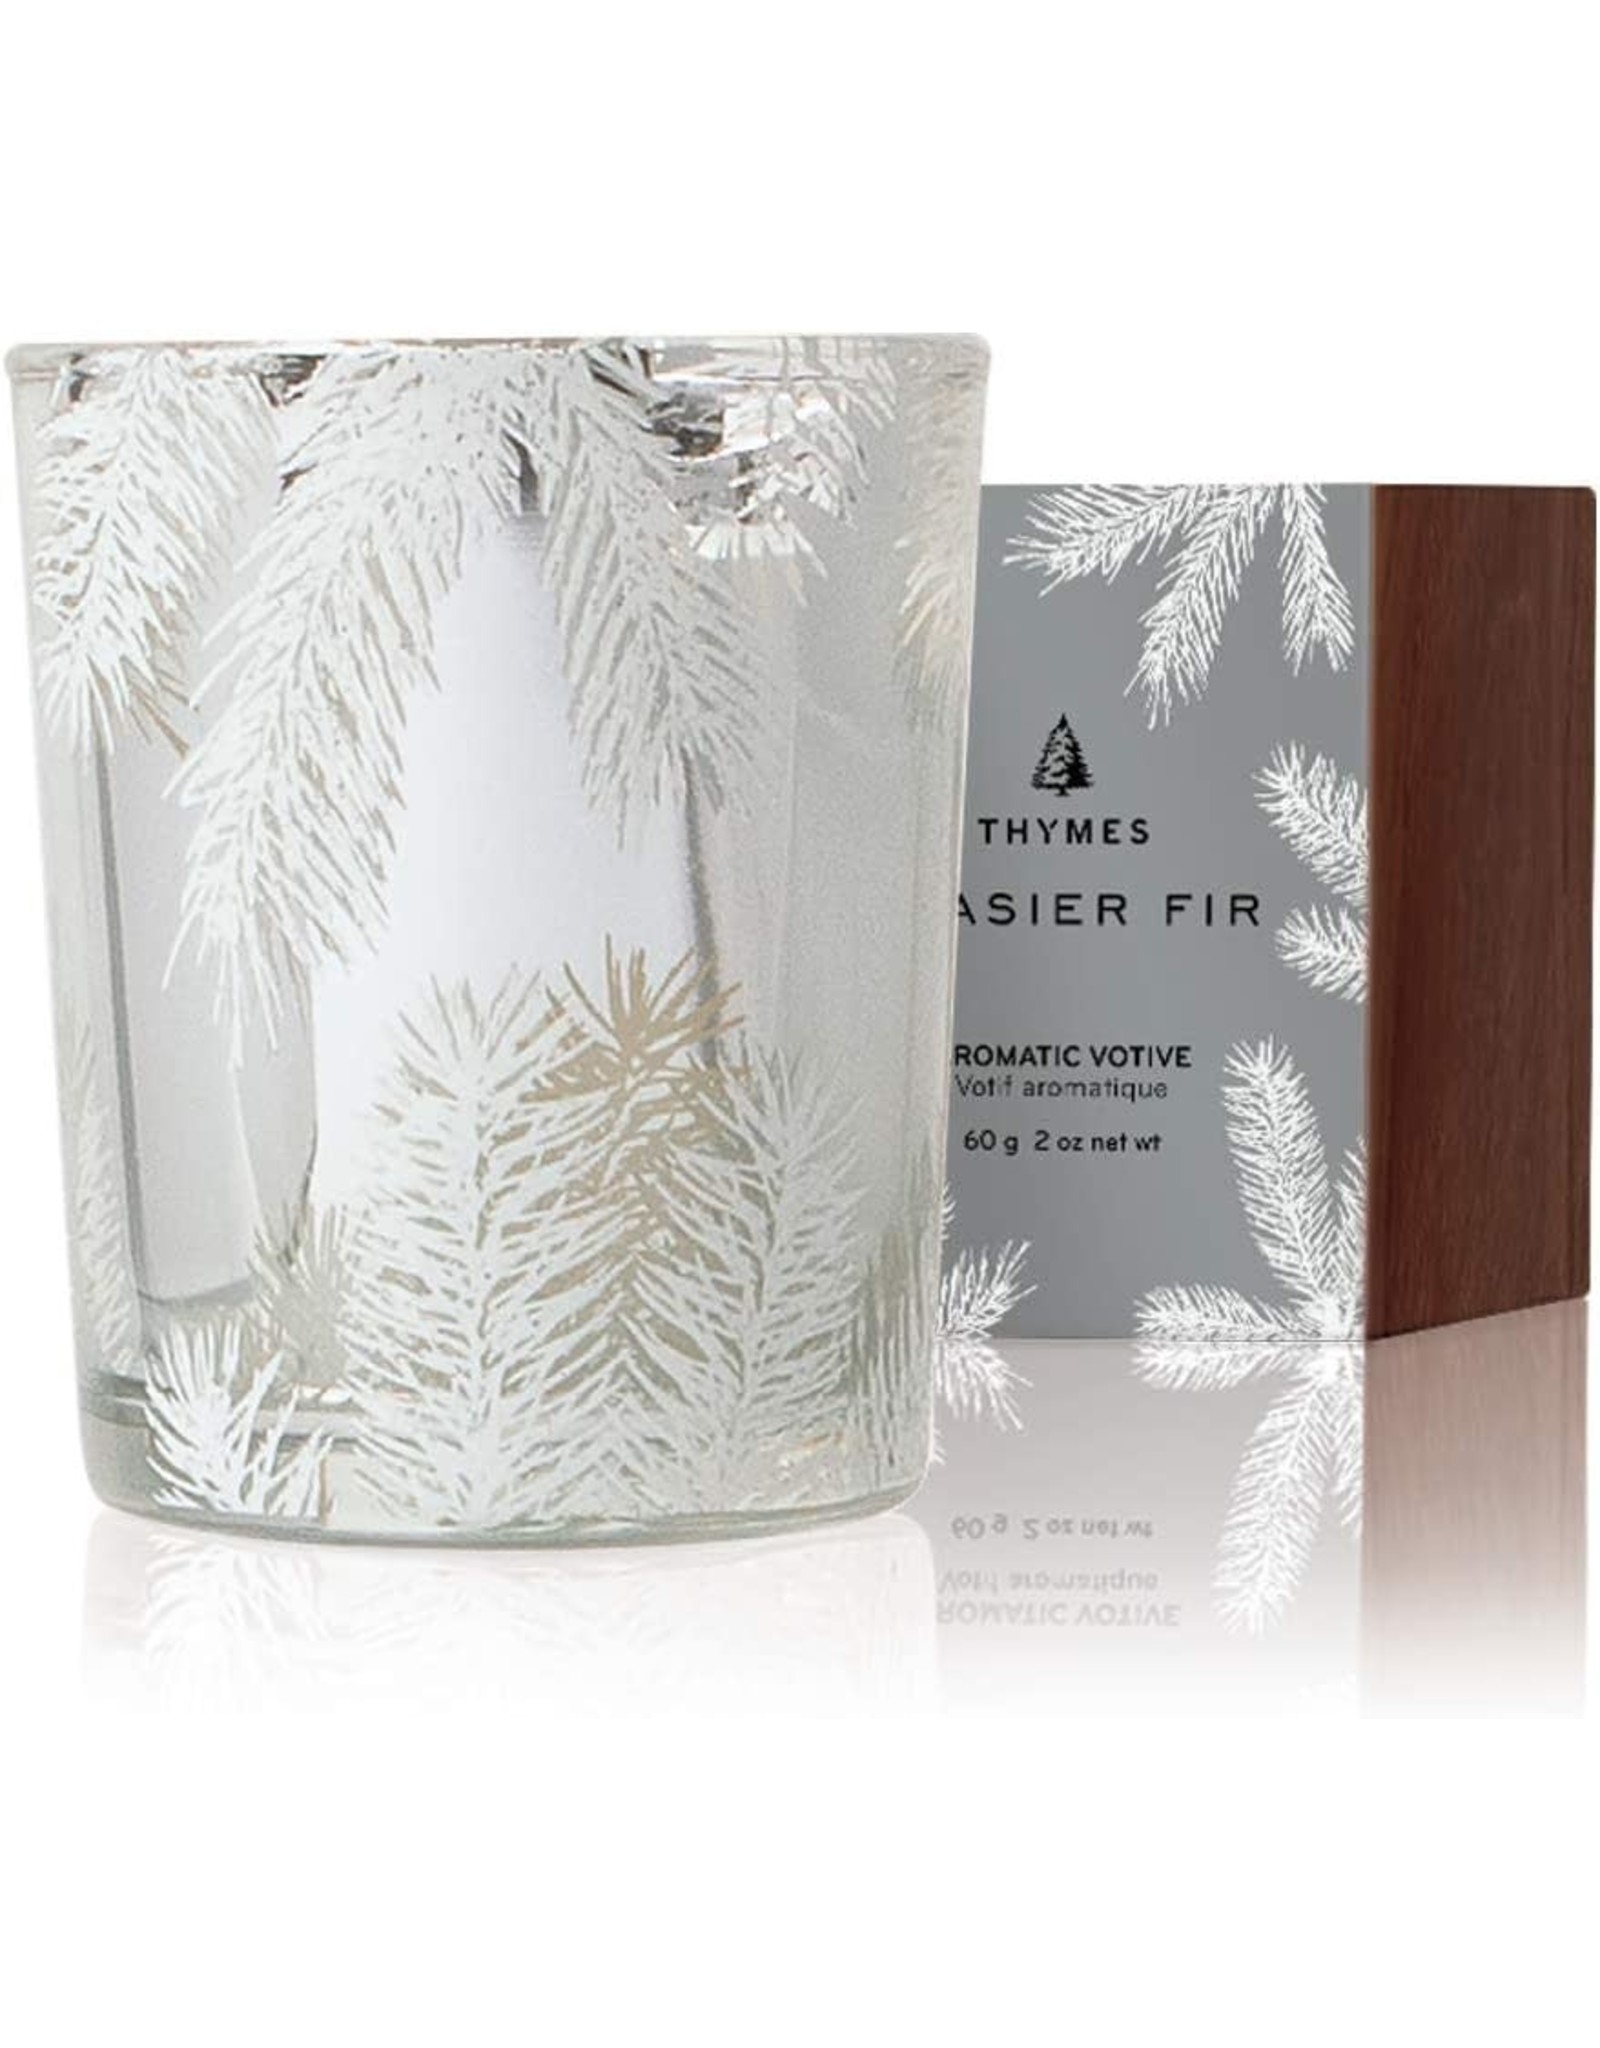 Thymes Frasier Fir Pine Needle Candle